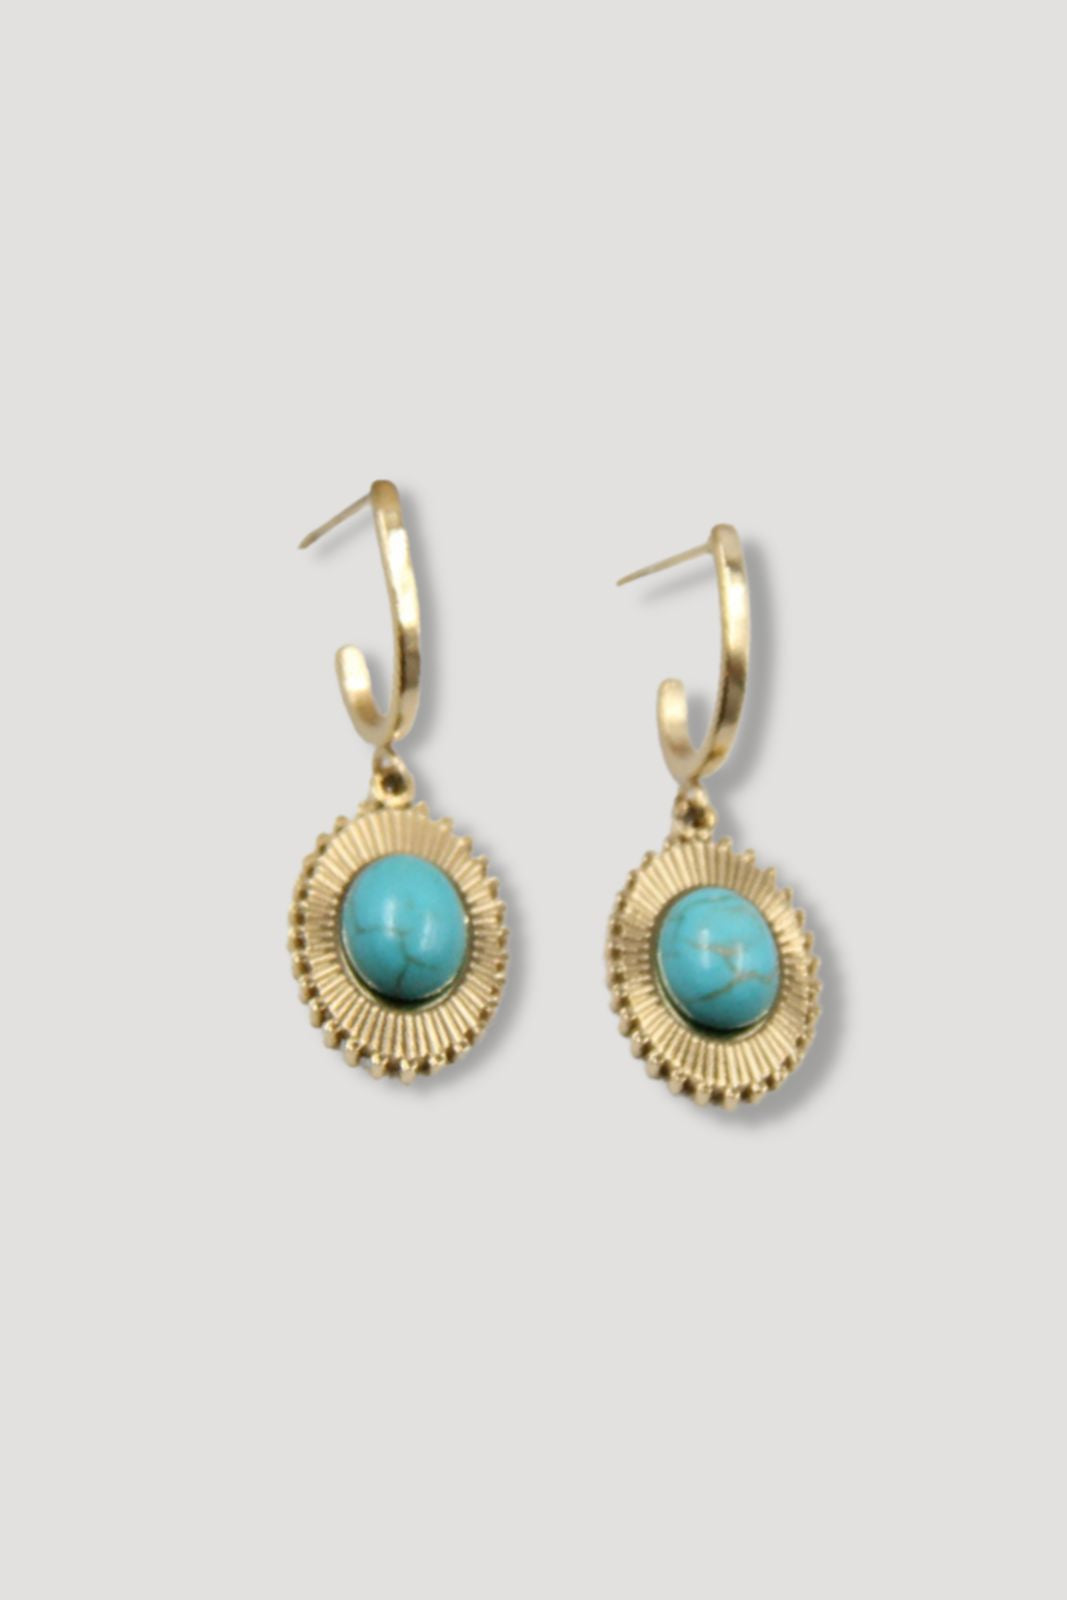 Earrings gold turquoise stone